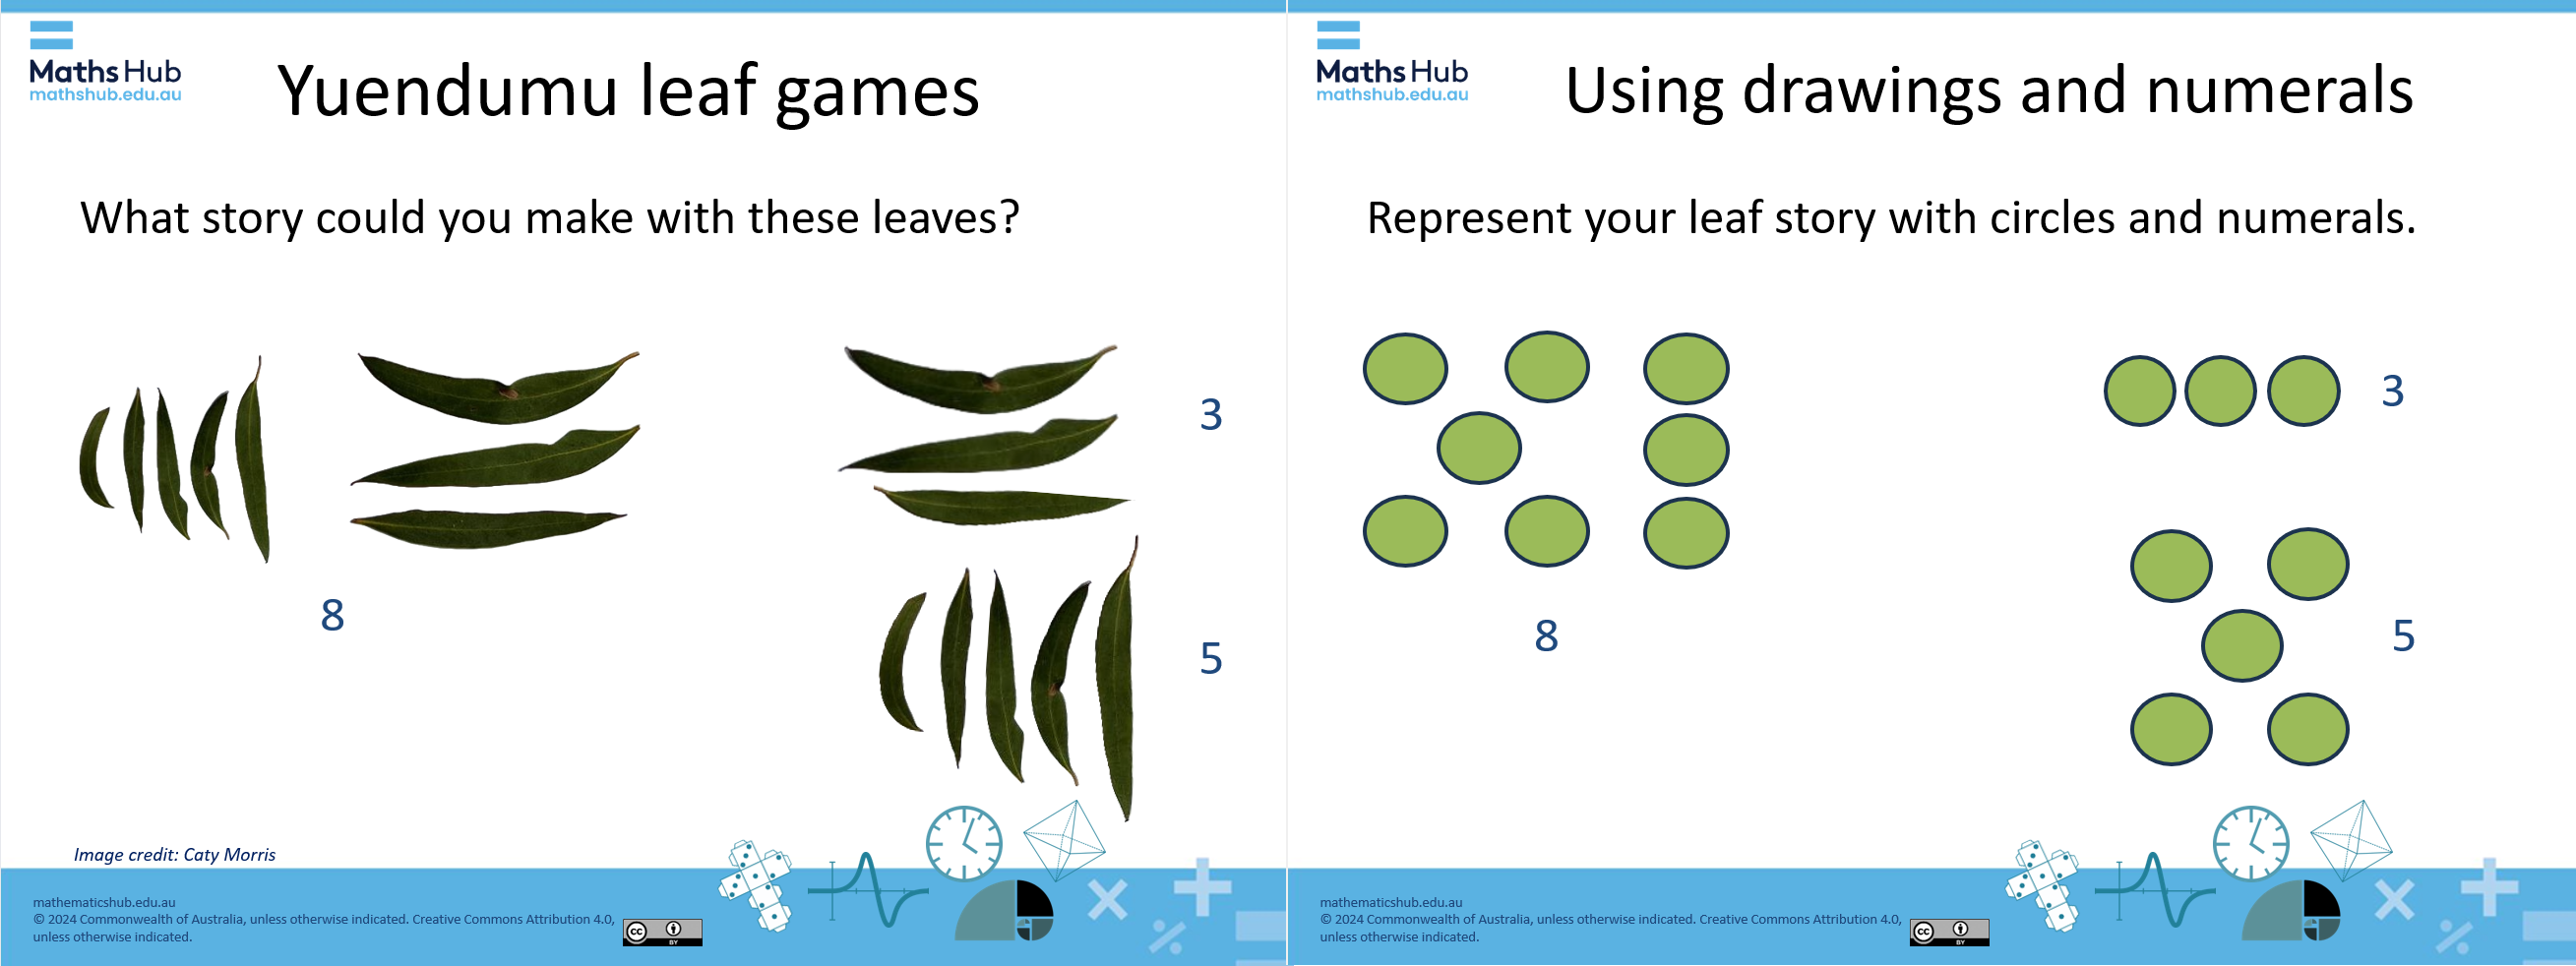 A screenshot of two slides. One shows the leaves a group of 8 leaves, next to it shown as a group of three leaves with a group of 5 leaves. The next slide shows the 8 leaves represented as 8 circles with the 3 circles and 5 circles.